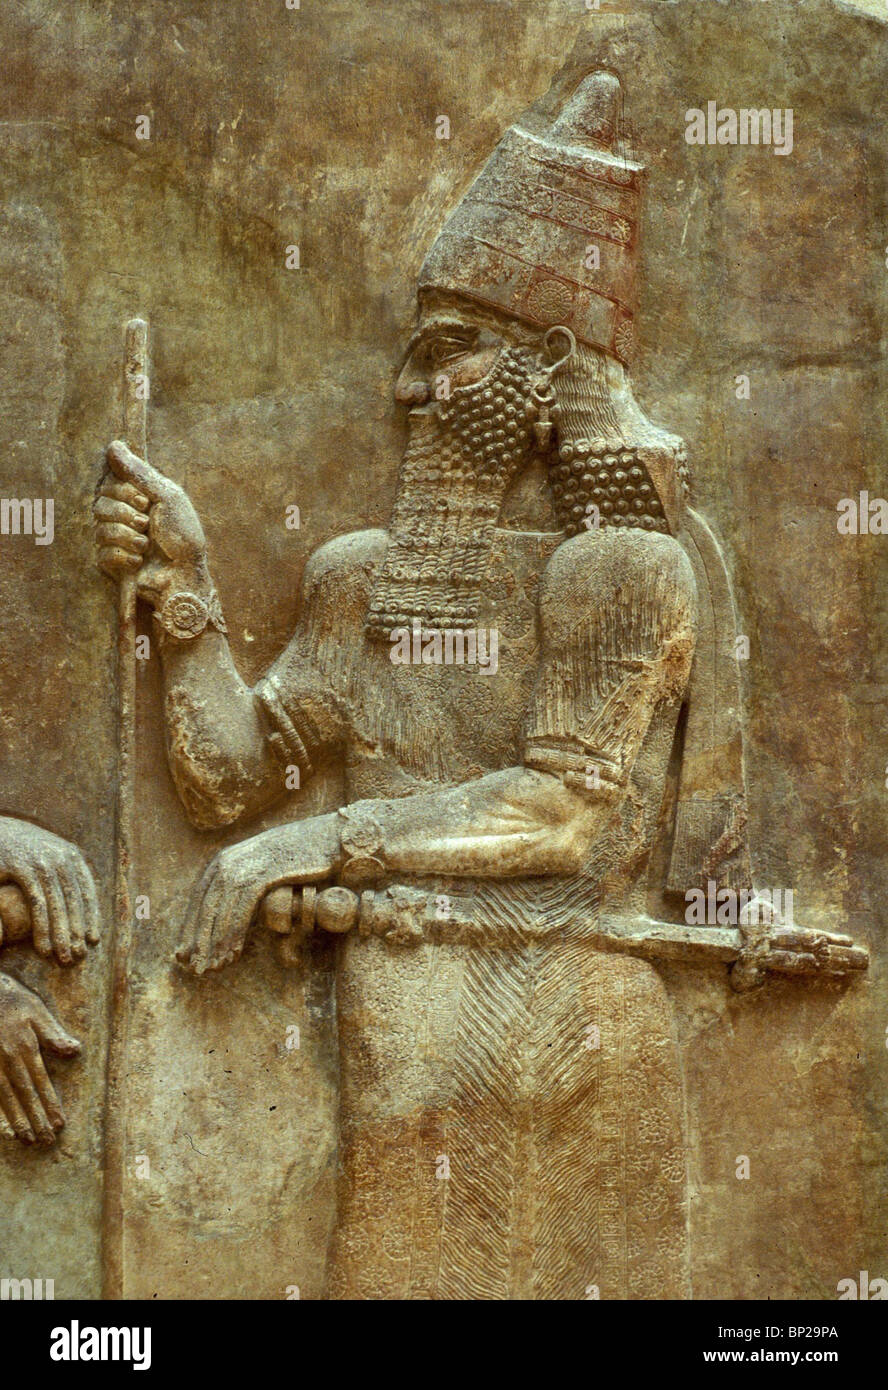 3241. KING SARGON II. OF ASSYRIA, RELIEF FROM KHORSABAD, 720 B.C. Stock Photo